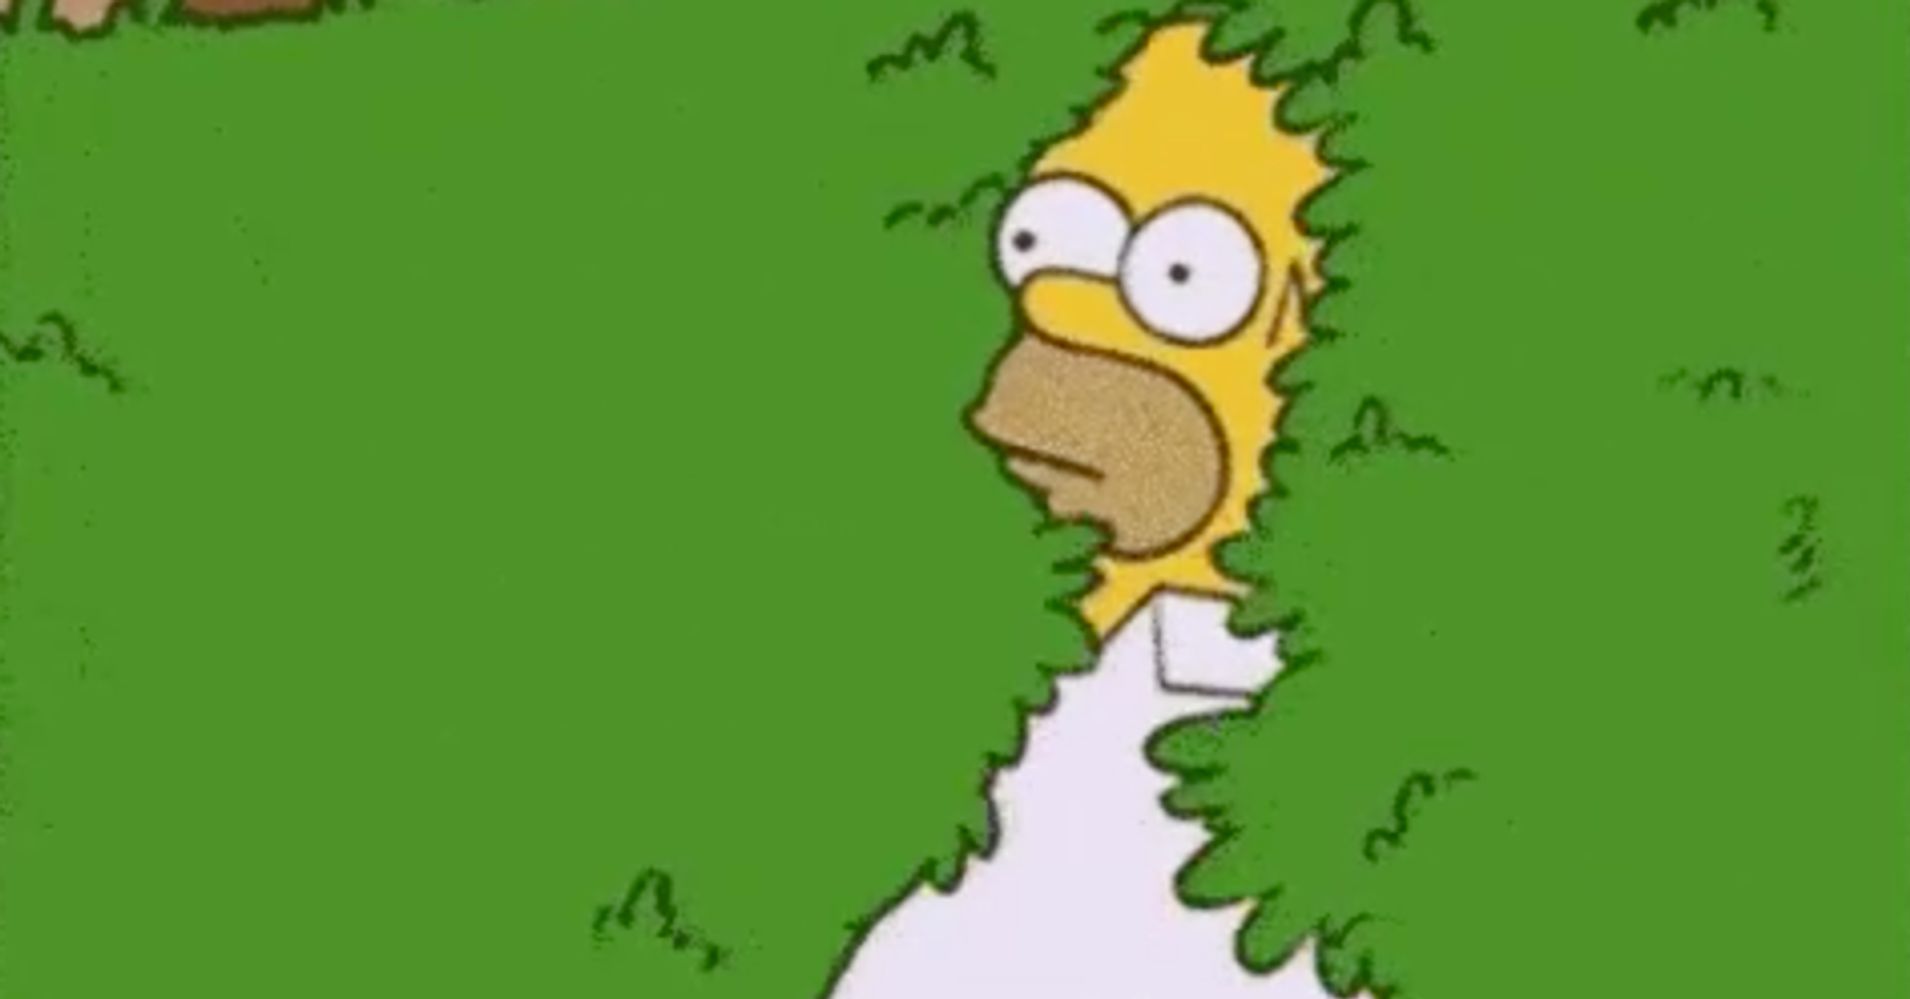 Homer Simpson Uses His Own Backing Into Bushes On The Simpsons